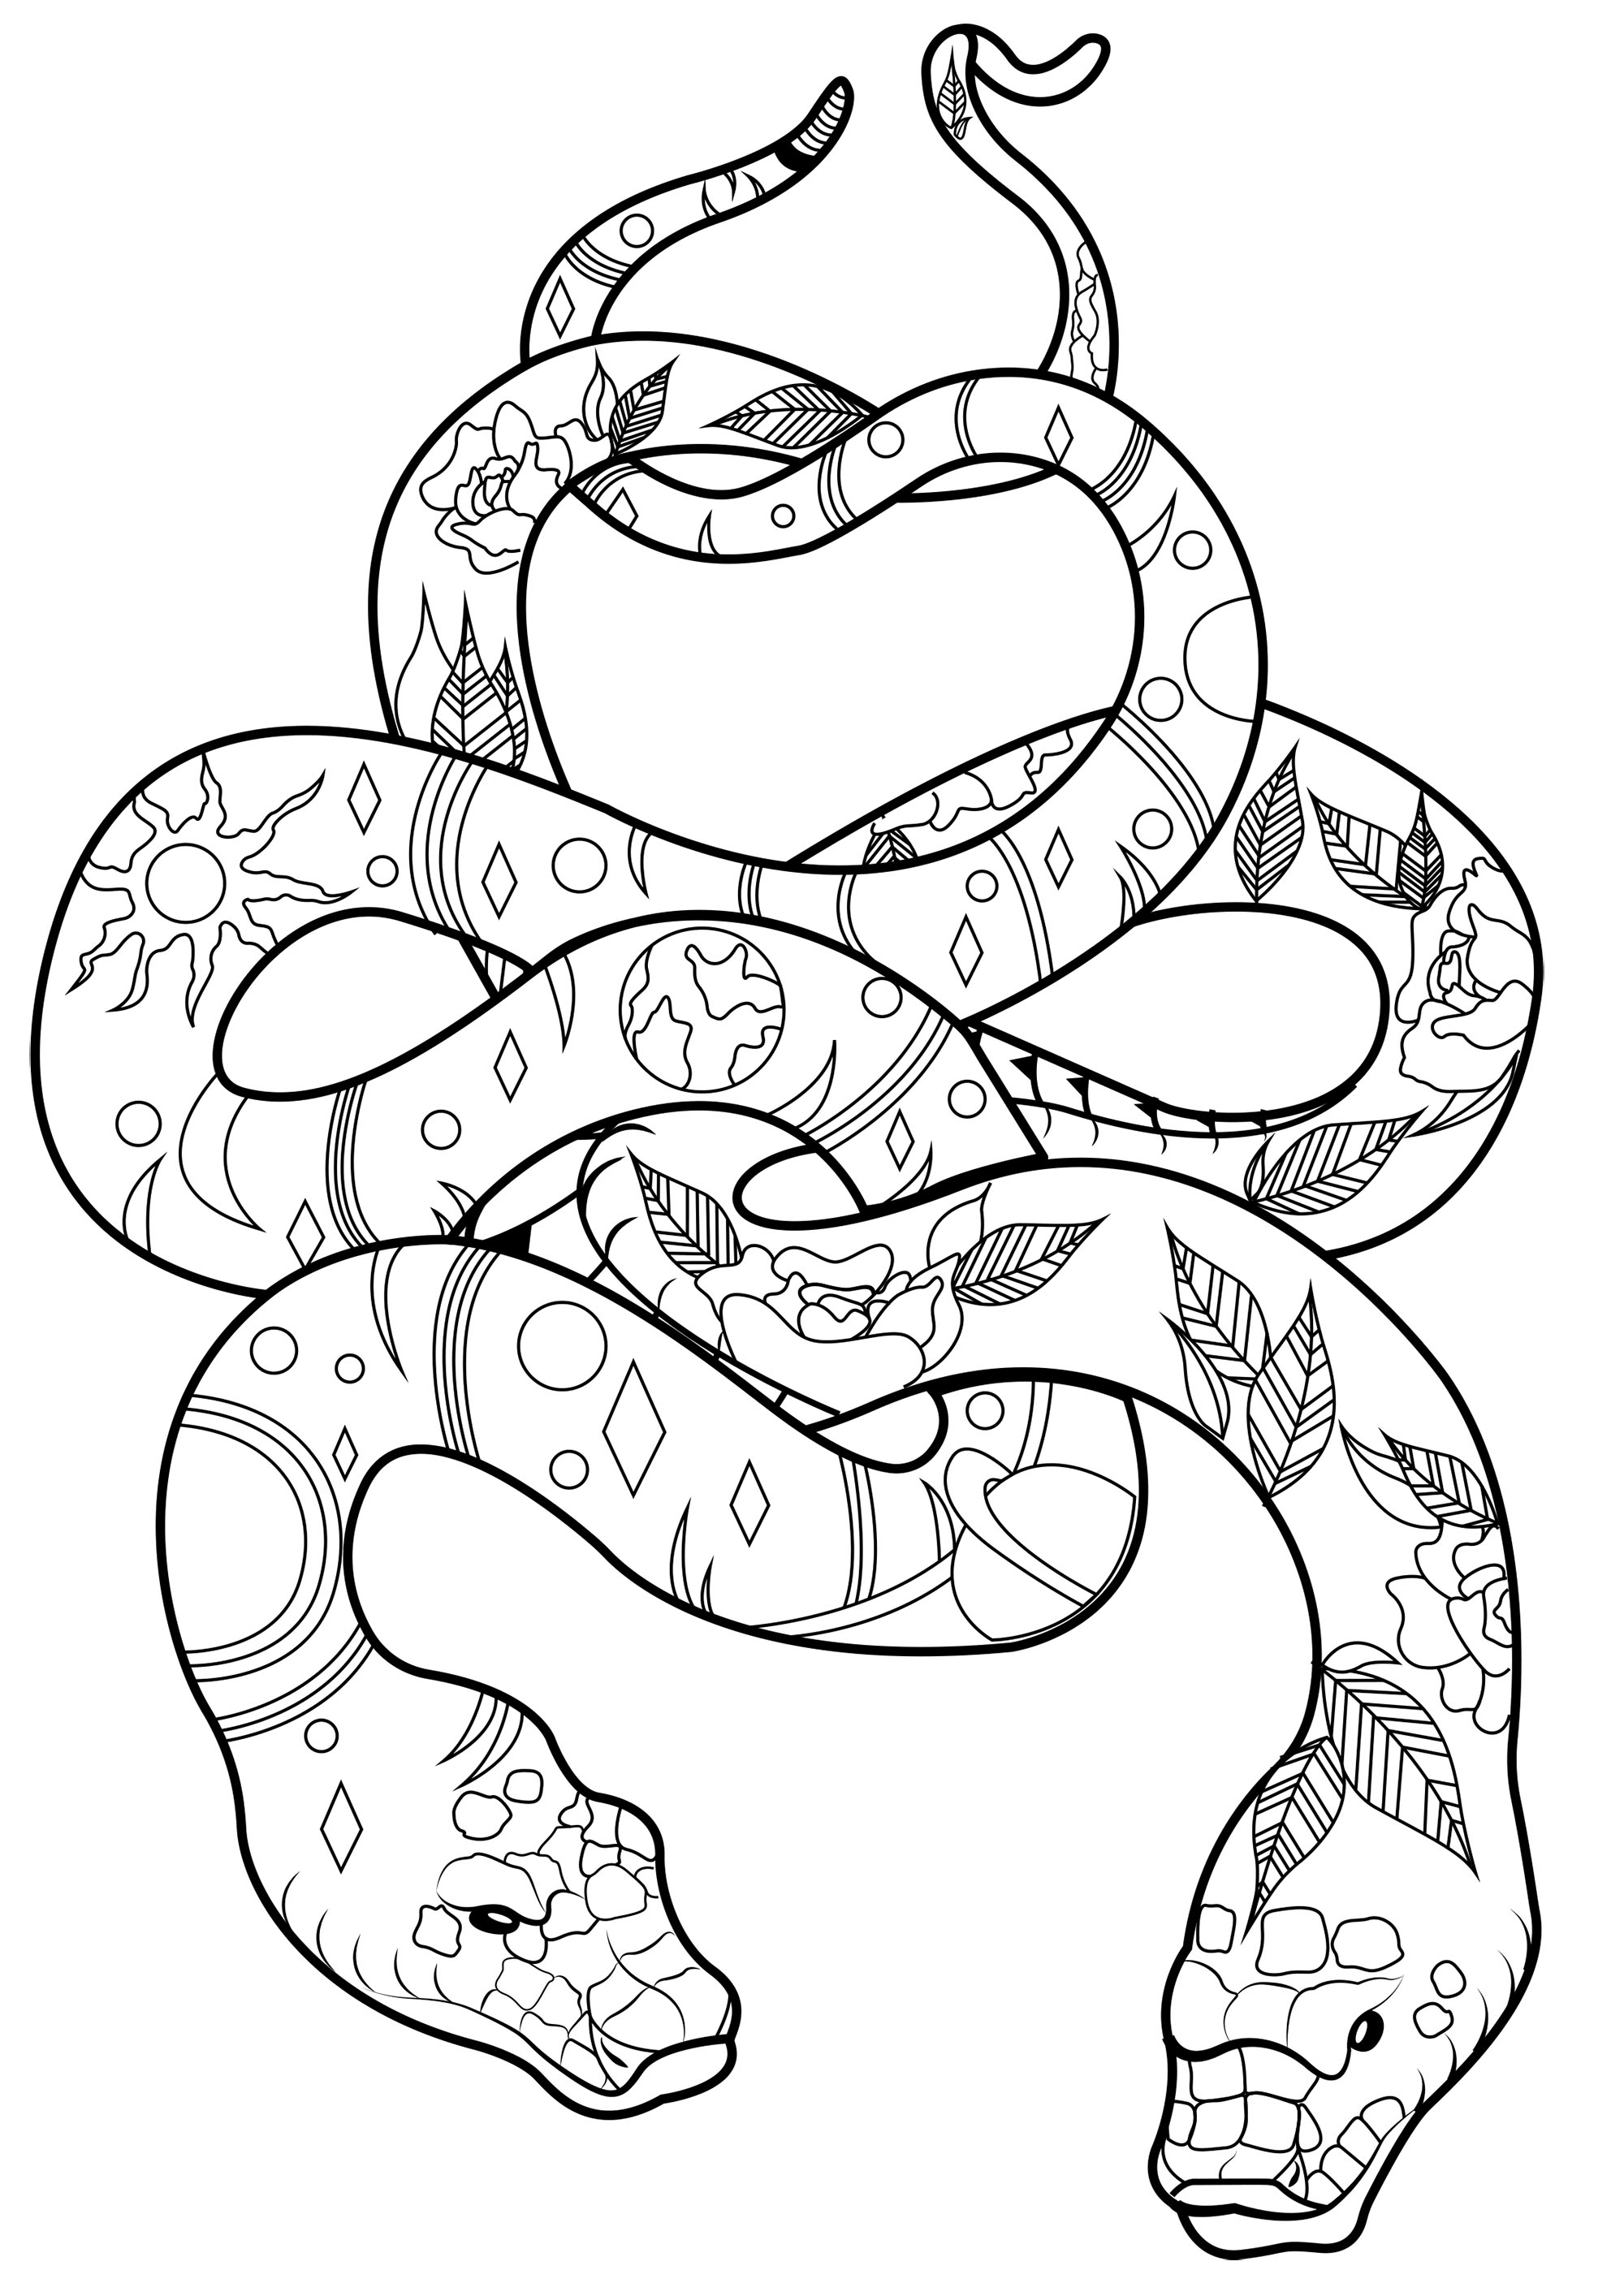 Two Snakes with patterns - Snakes Adult Coloring Pages